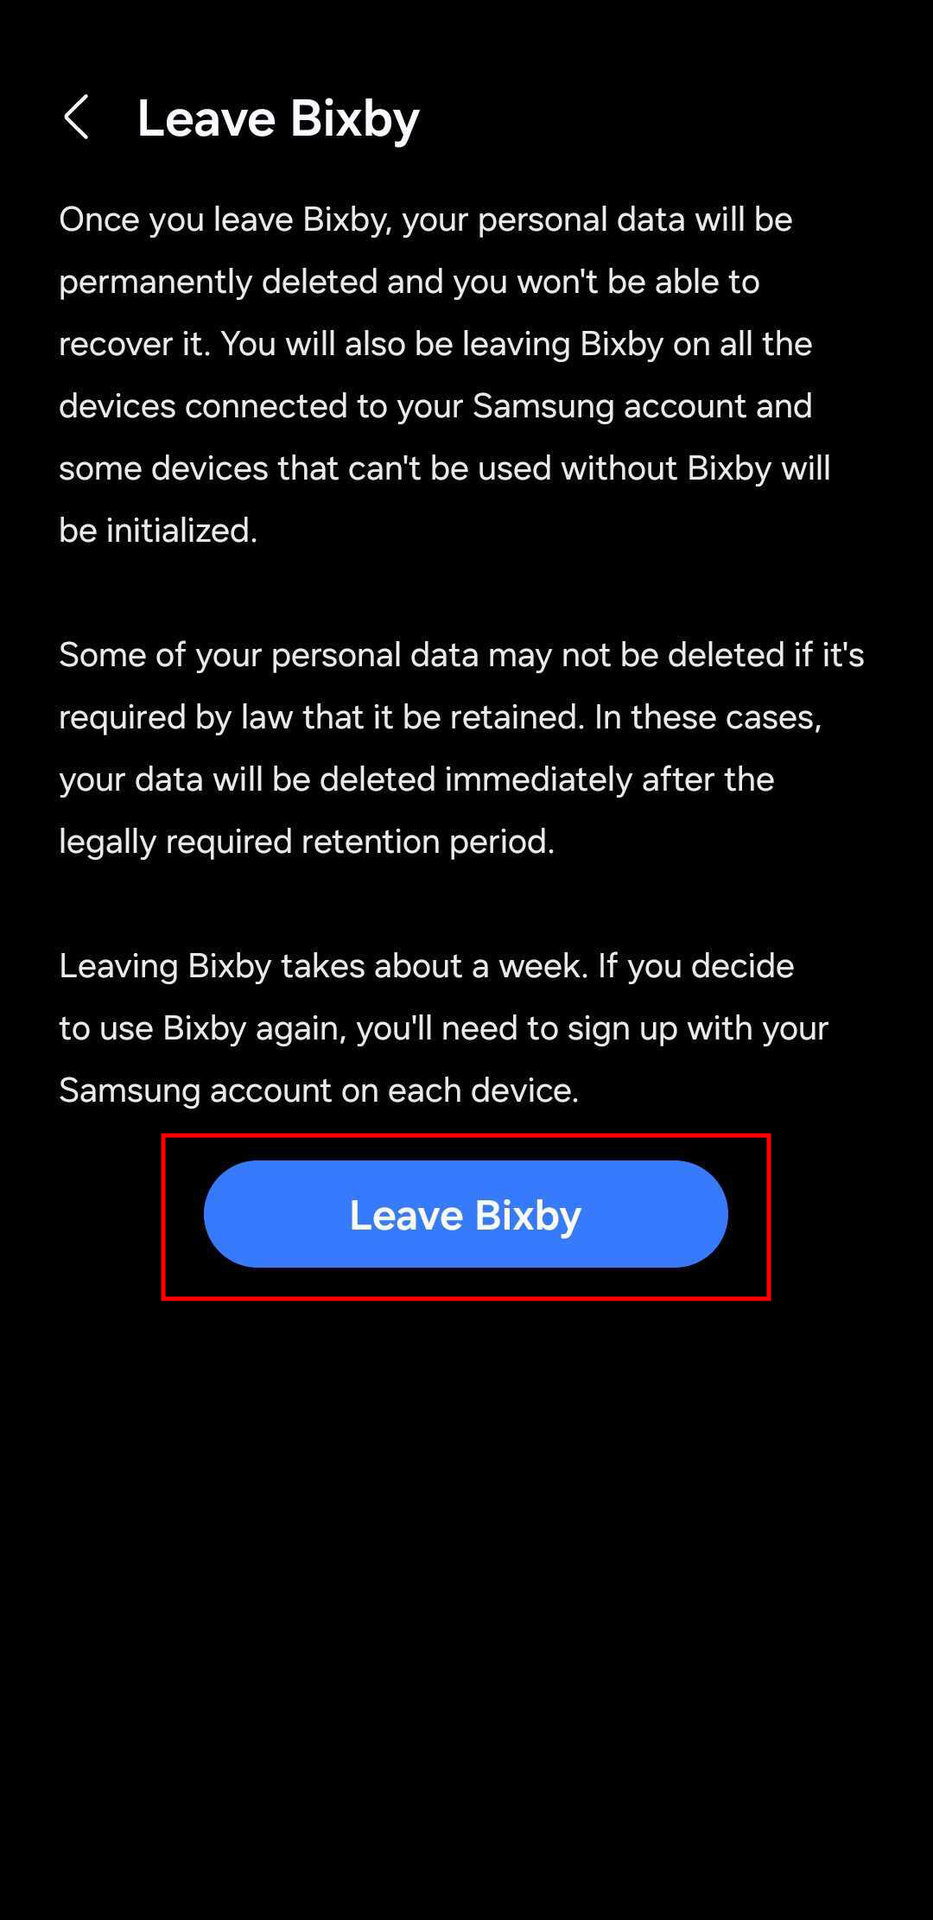 How to leave Bixby (4)